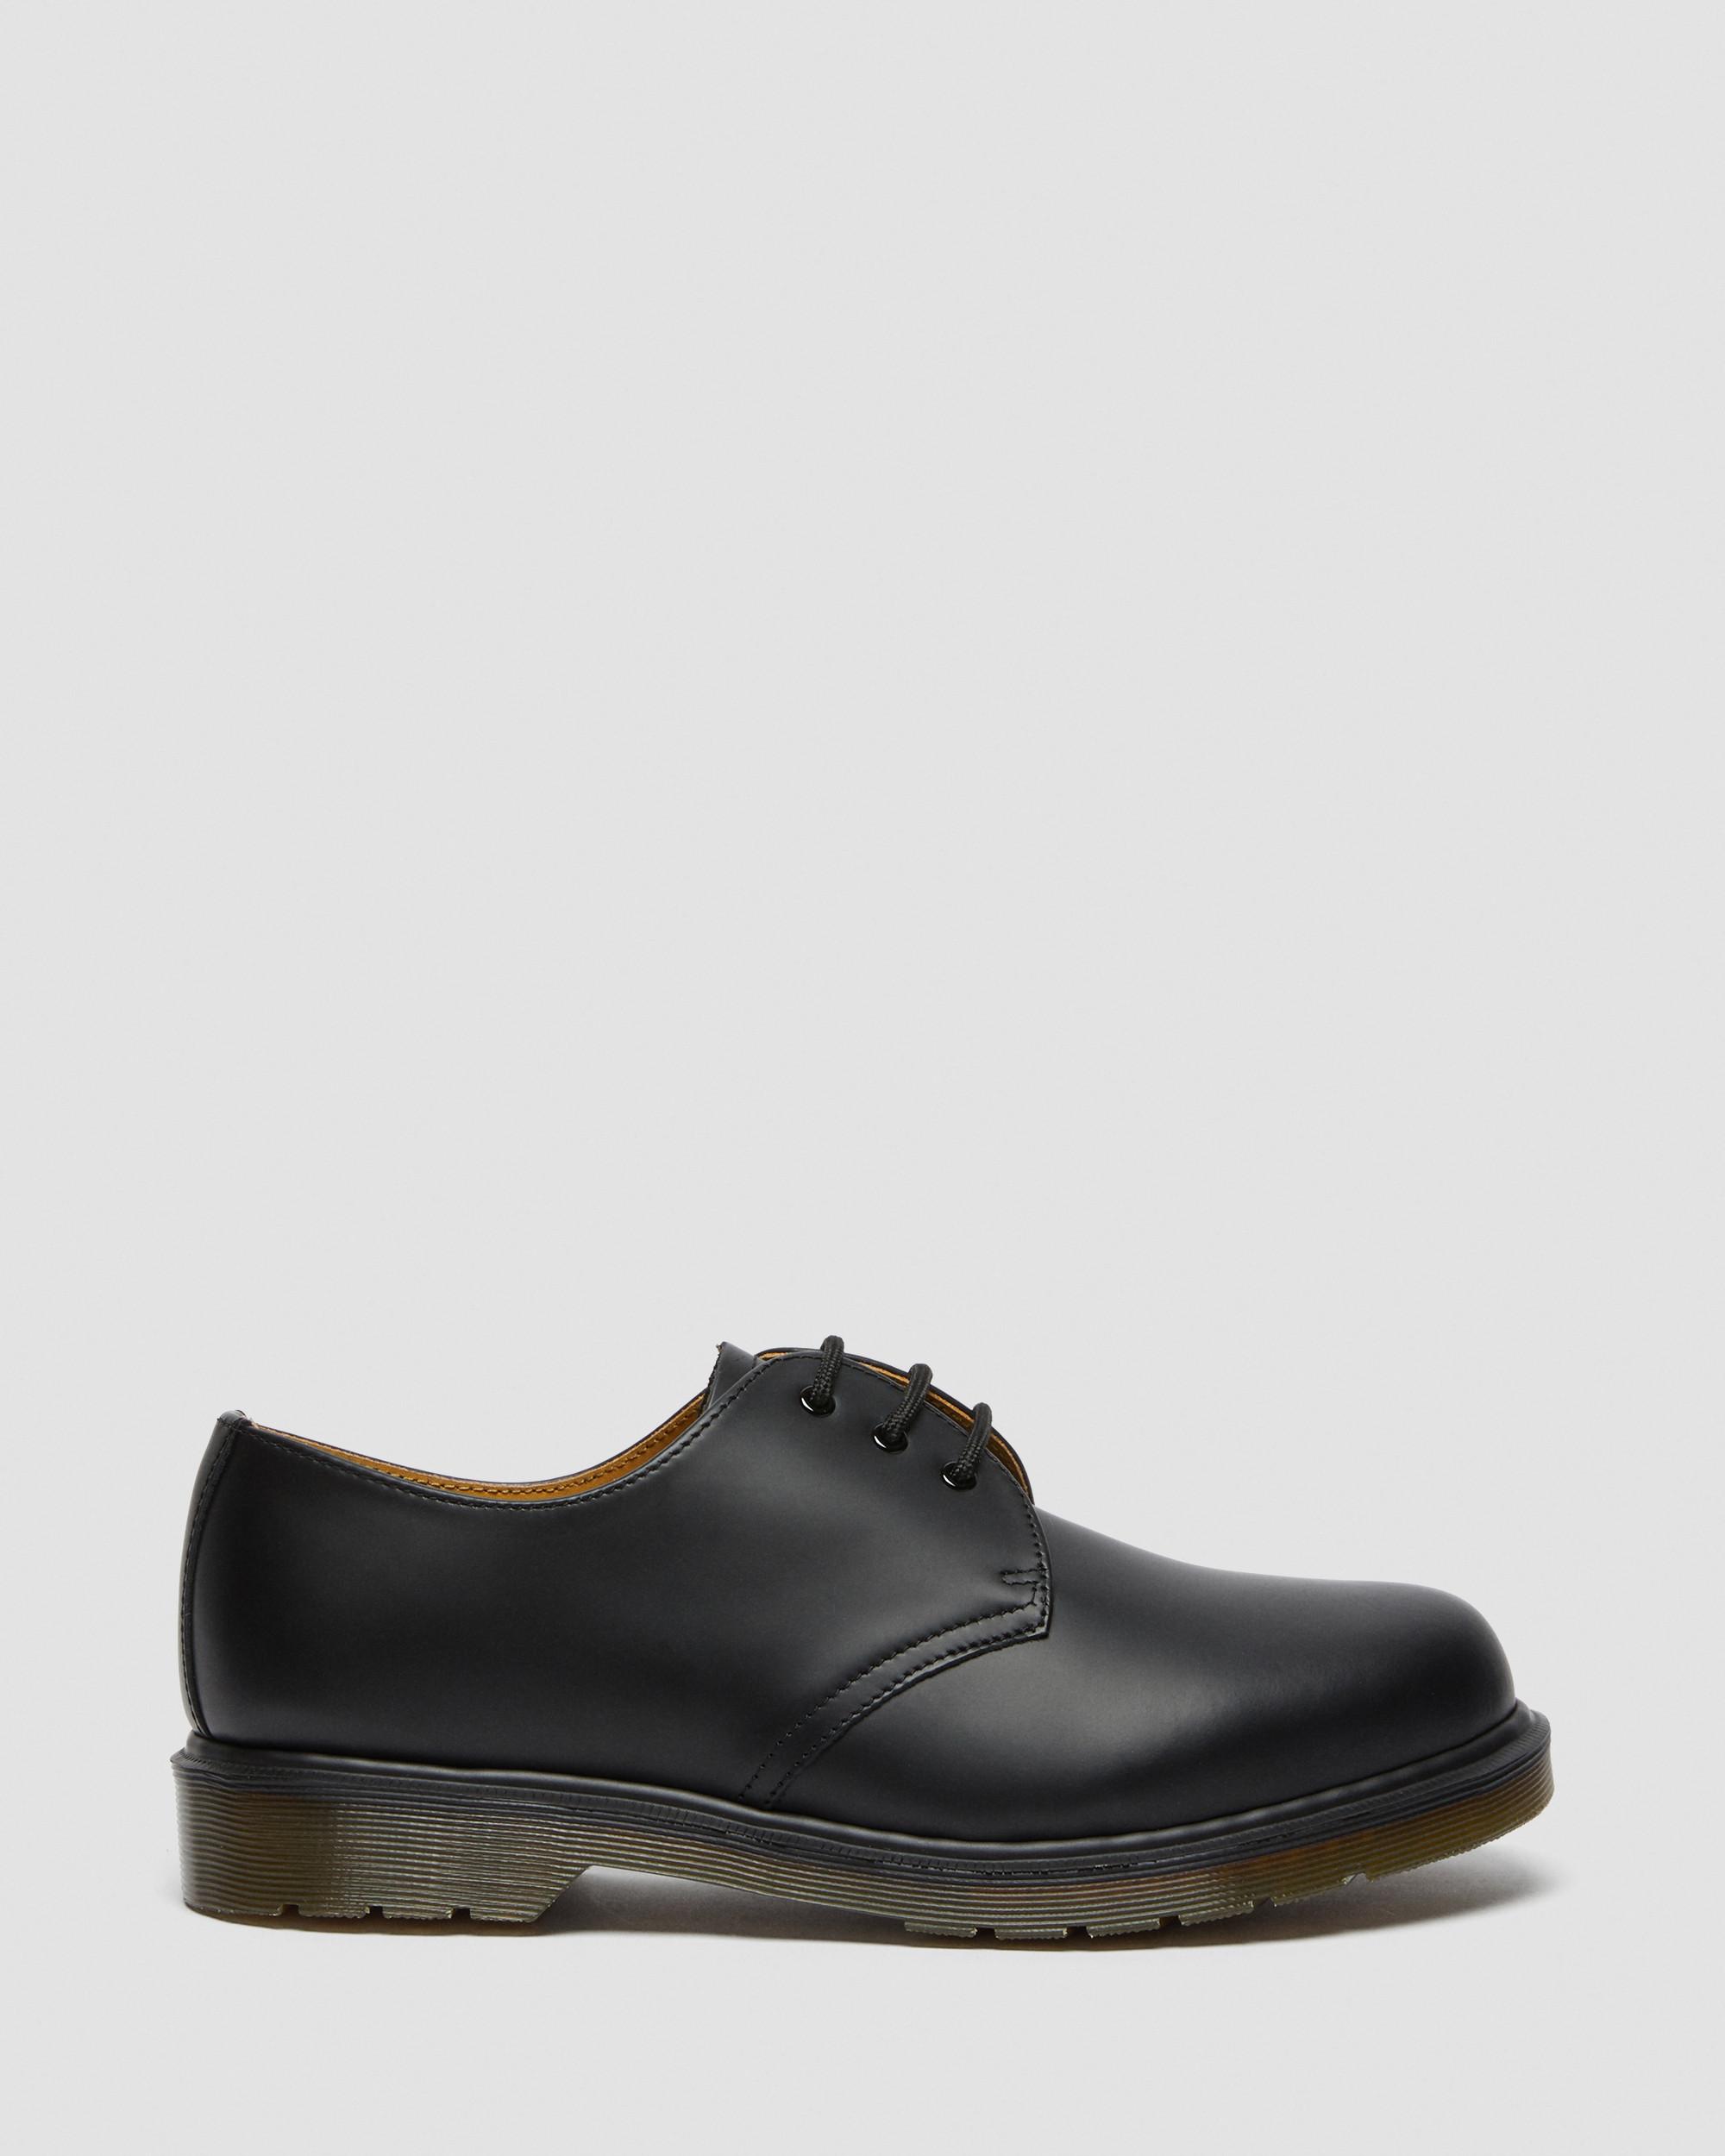 1461 PLAIN WELT SMOOTH LEATHER OXFORD SHOES | Dr. Martens Official